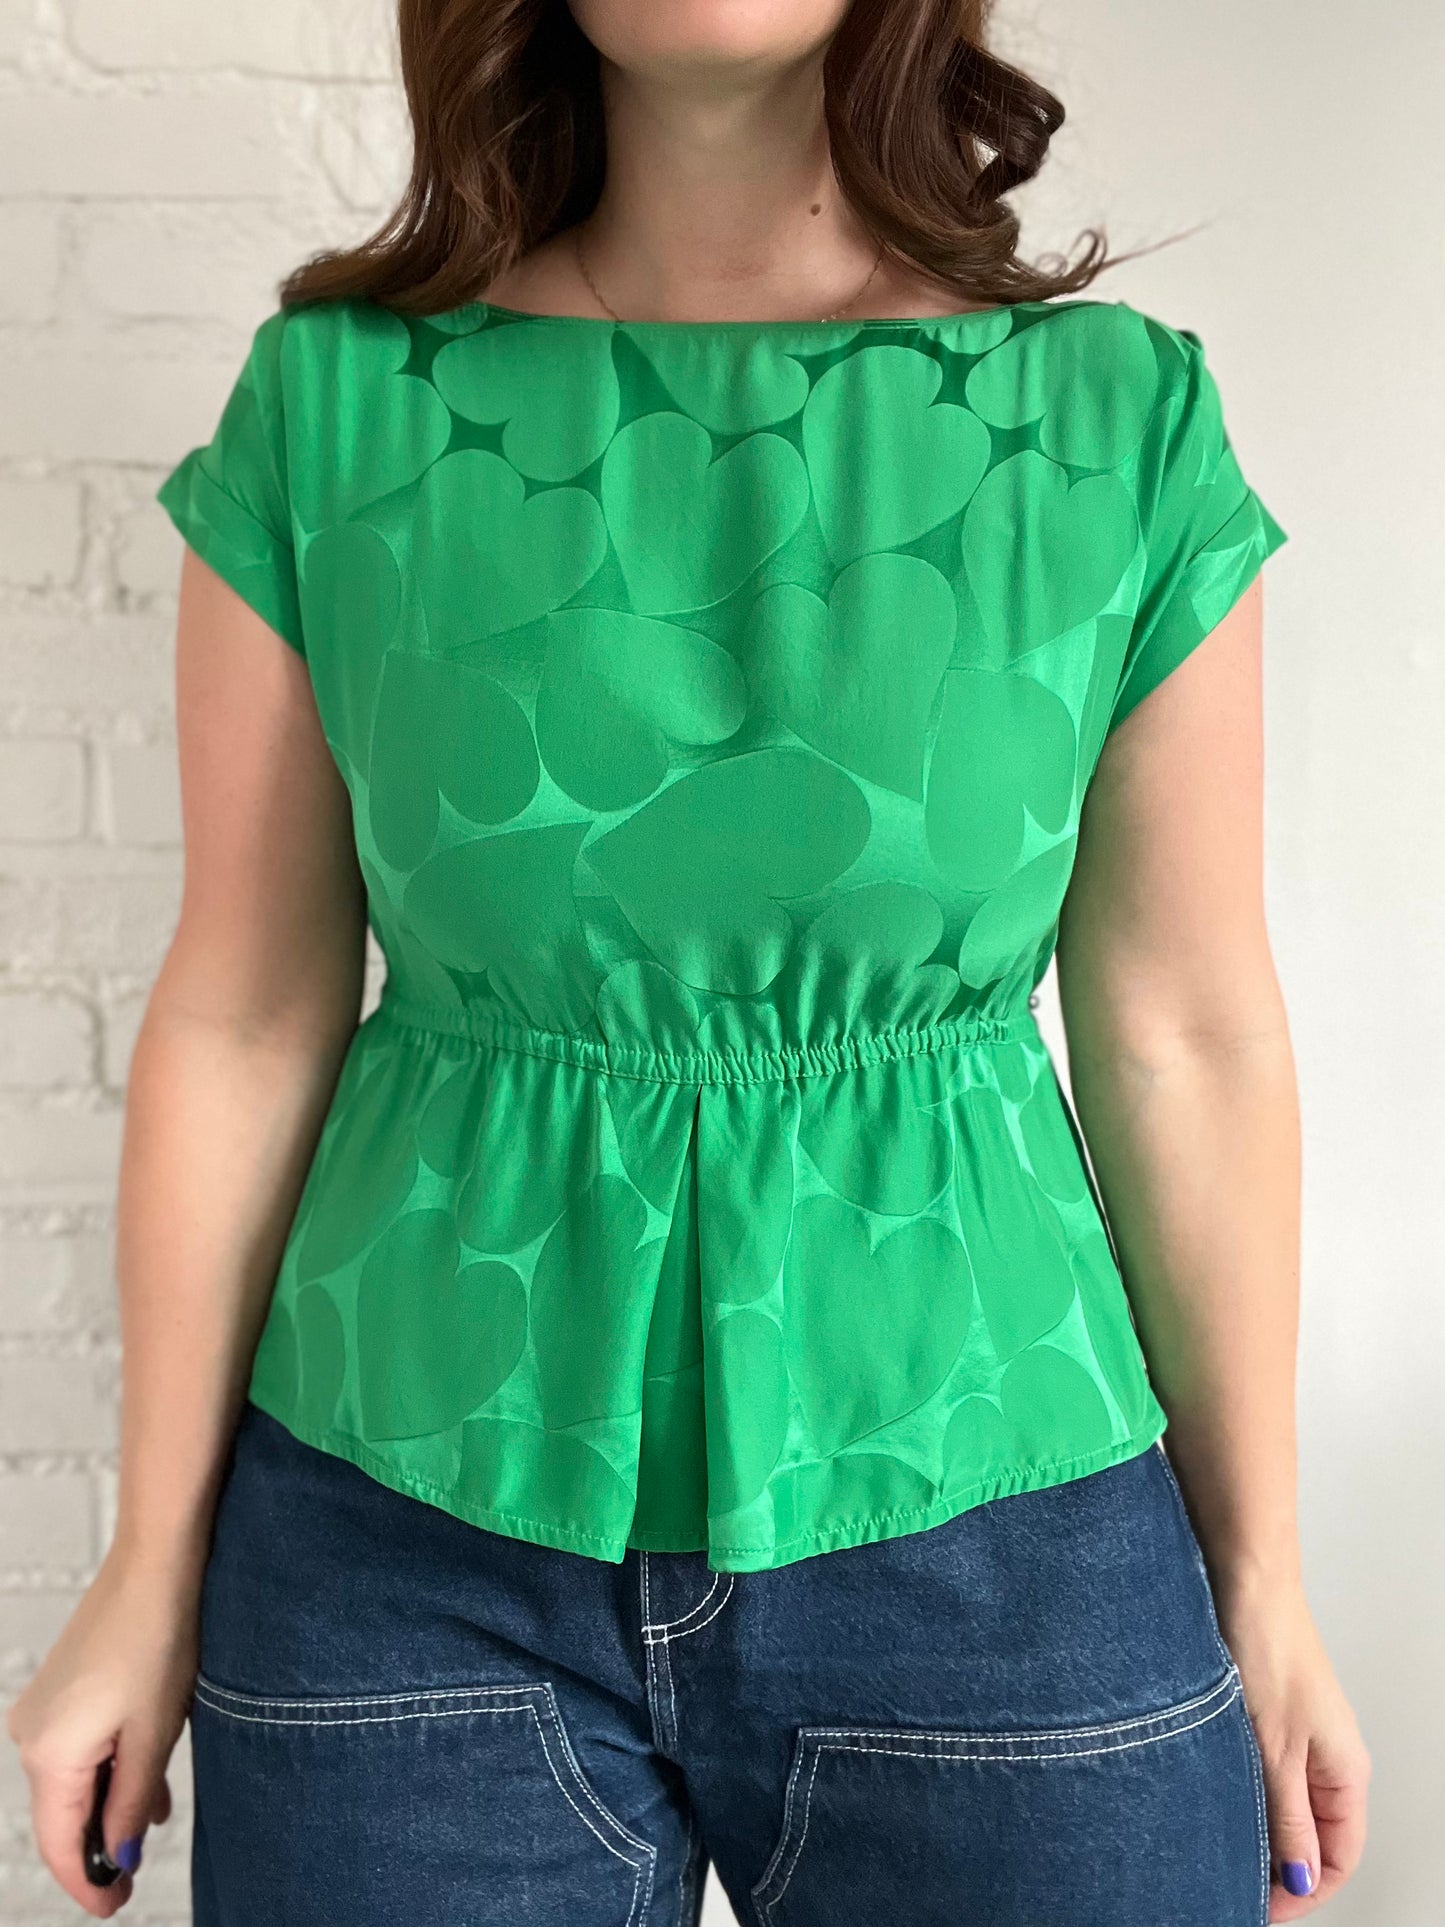 Marc Jacobs Heart Silk Top - Size S